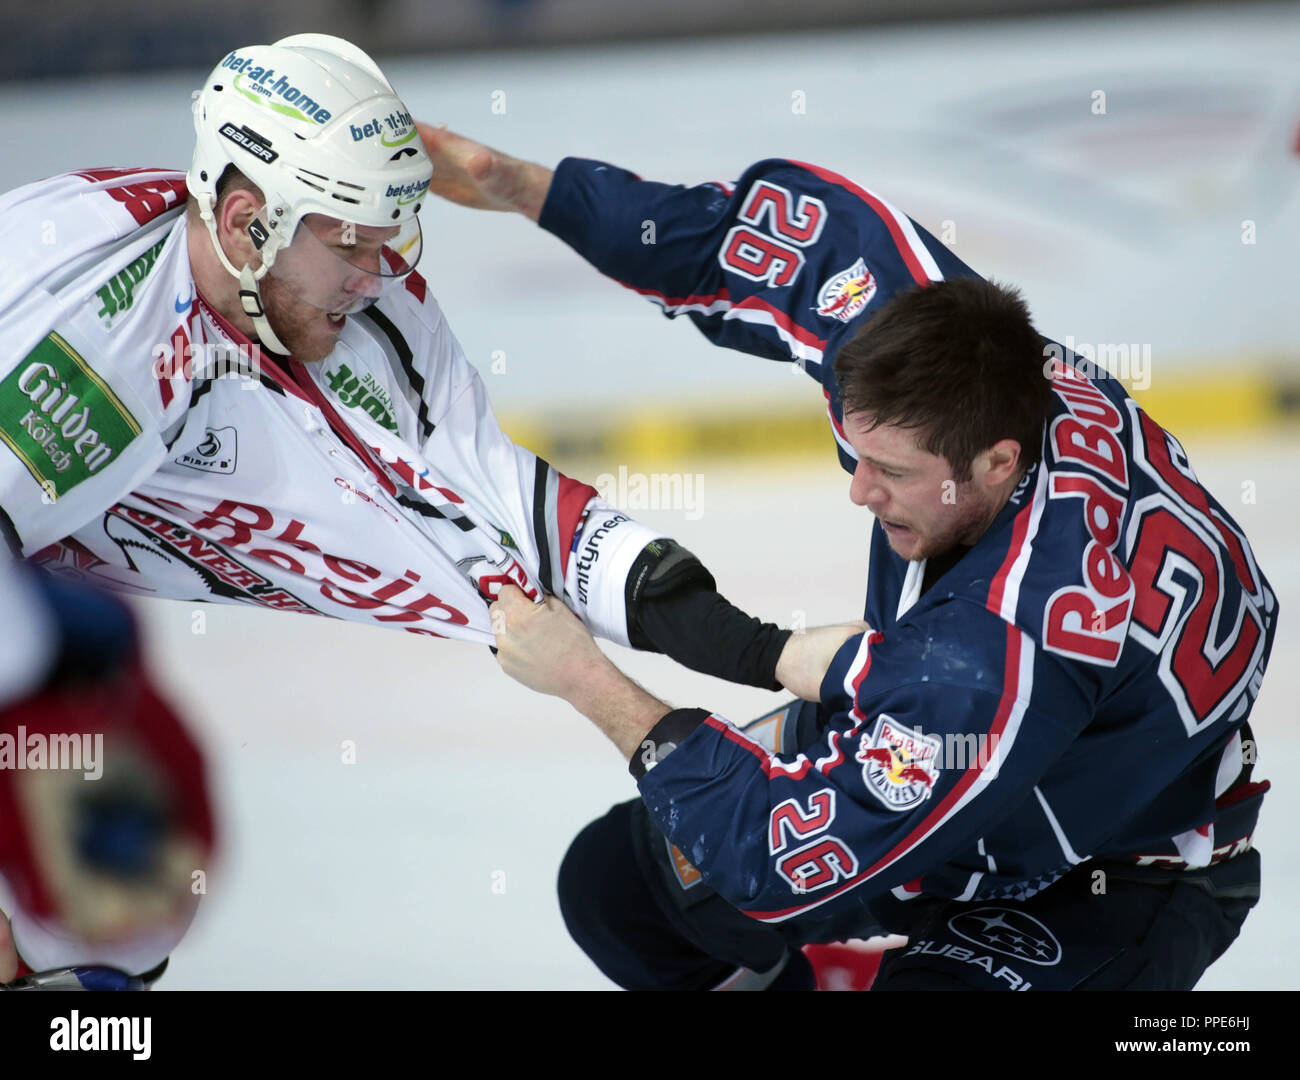 Ice hockey EHC Red Bull Muenchen - Koelner Haie, a fight between Jan Urbas from and EHC and Marcel Mueller from Koelner Haie Stock Photo